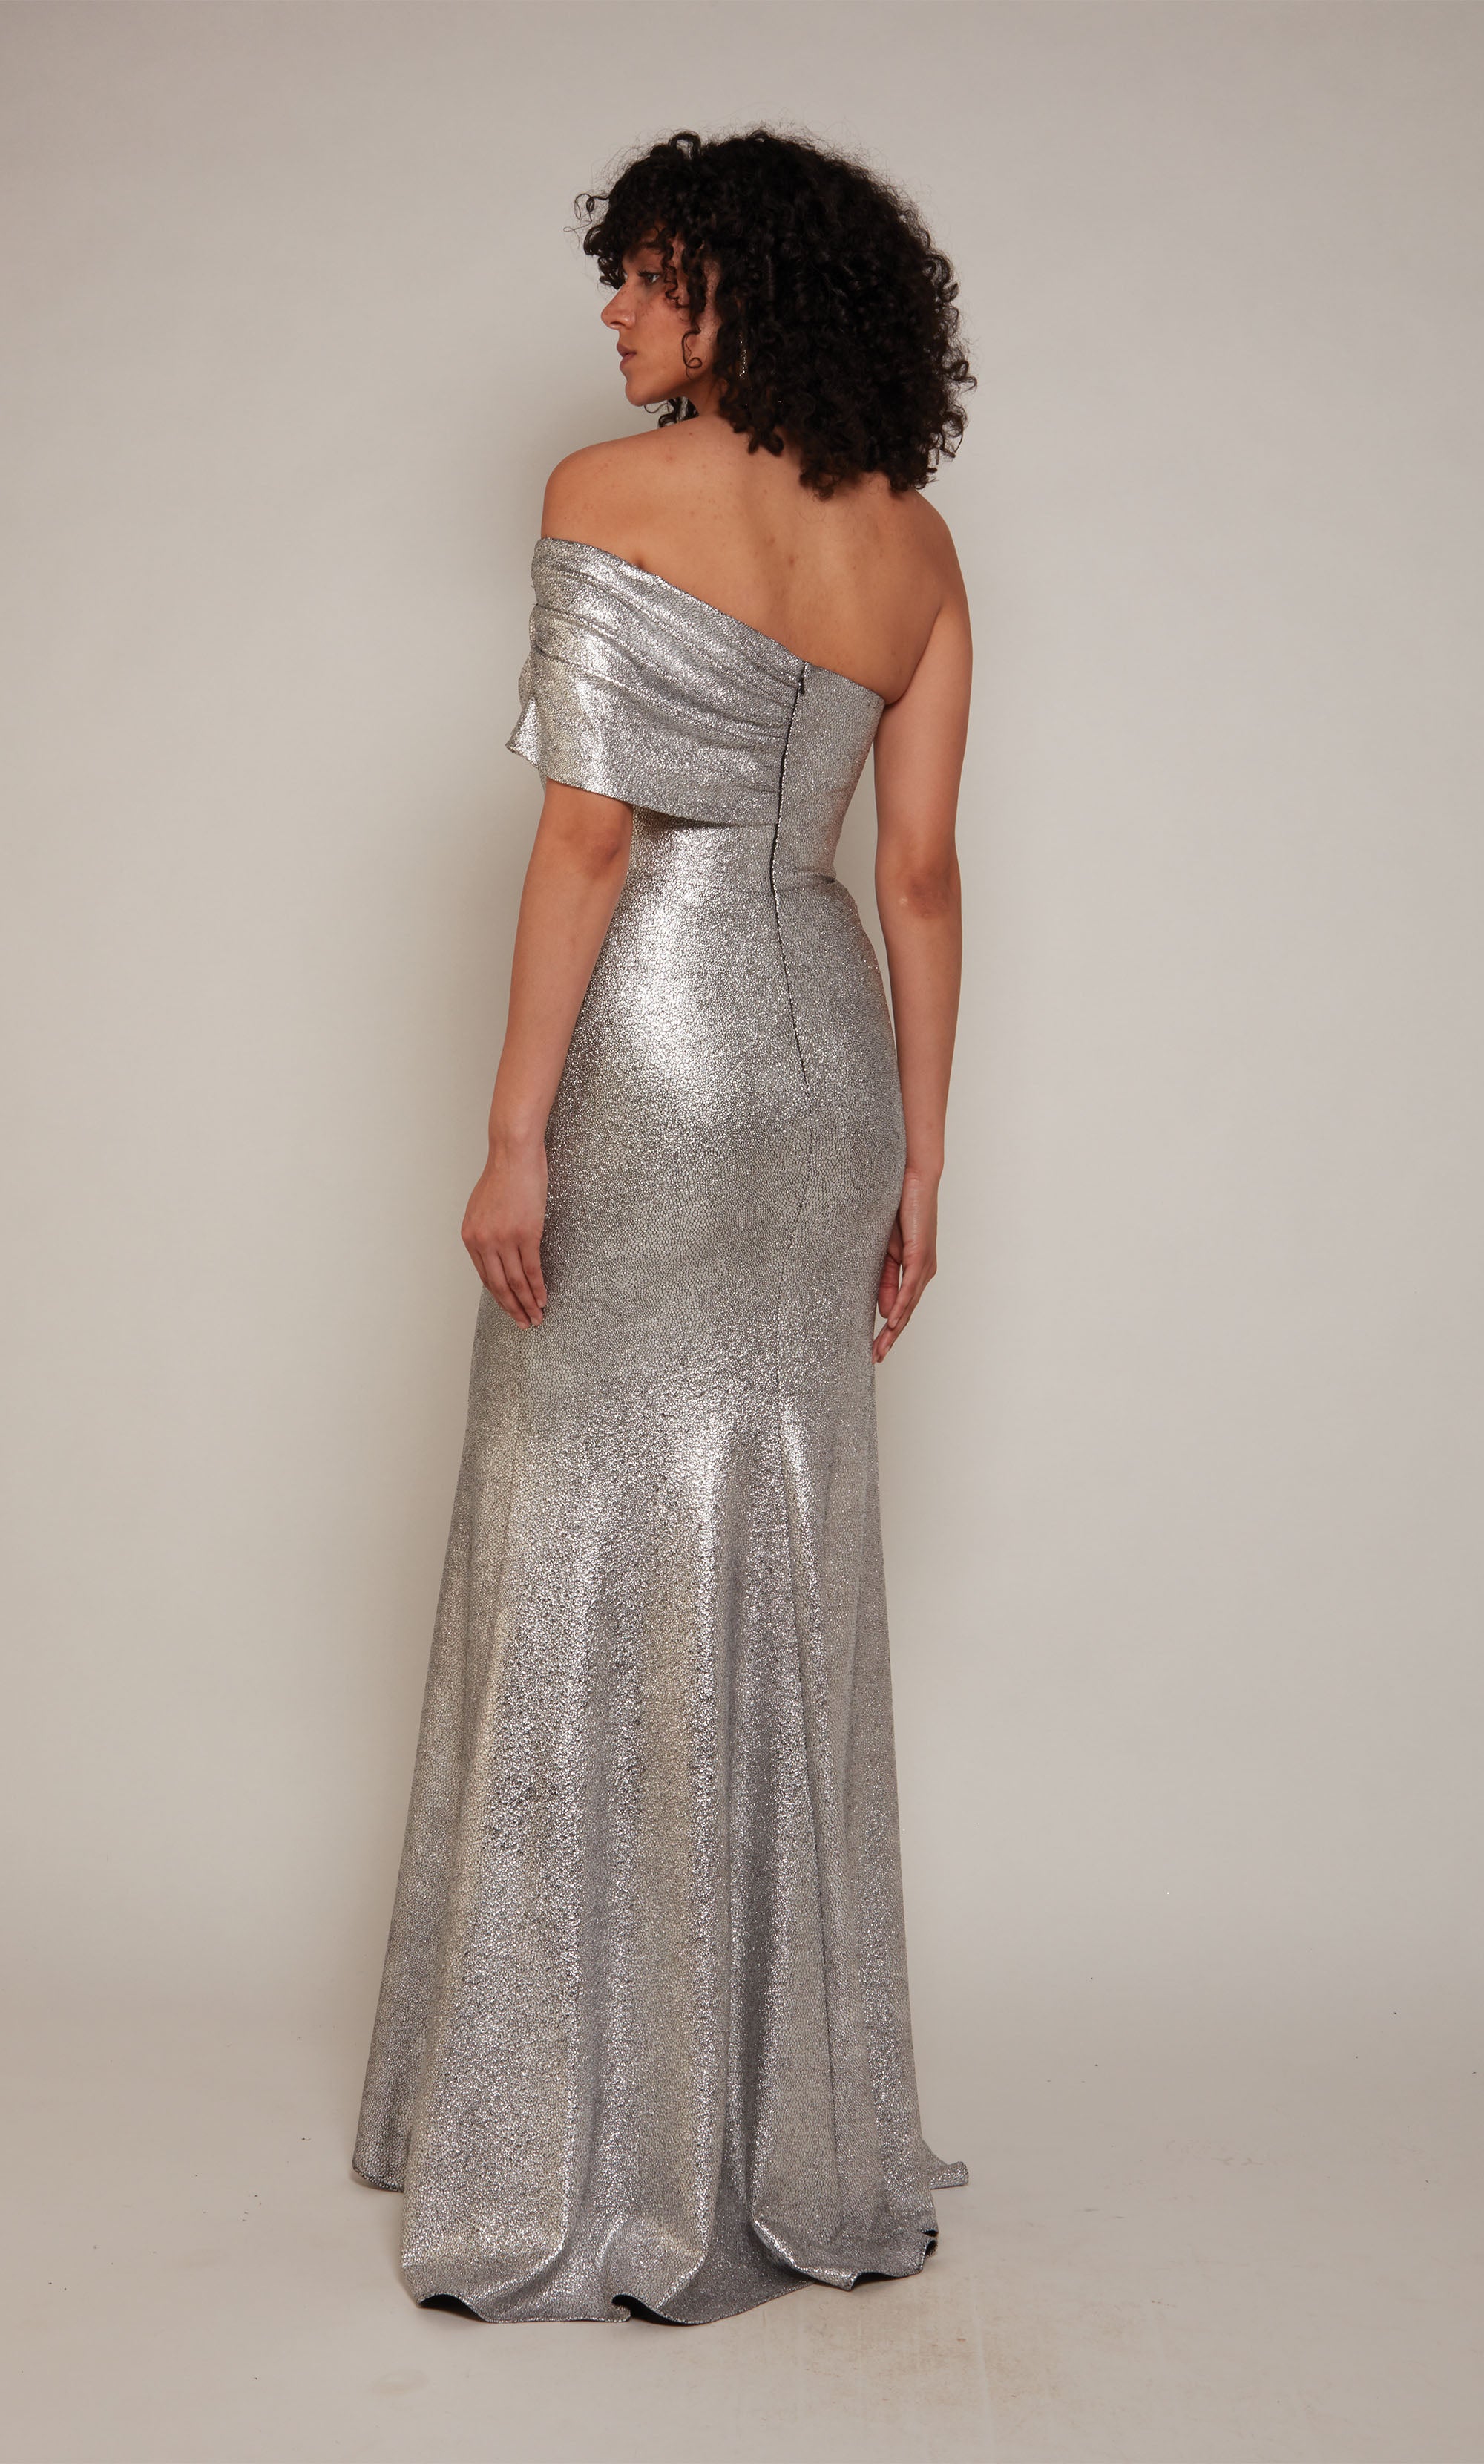 A silver evening gown boasting a one shoulder neckline, a front slit, and a detachable side drape.